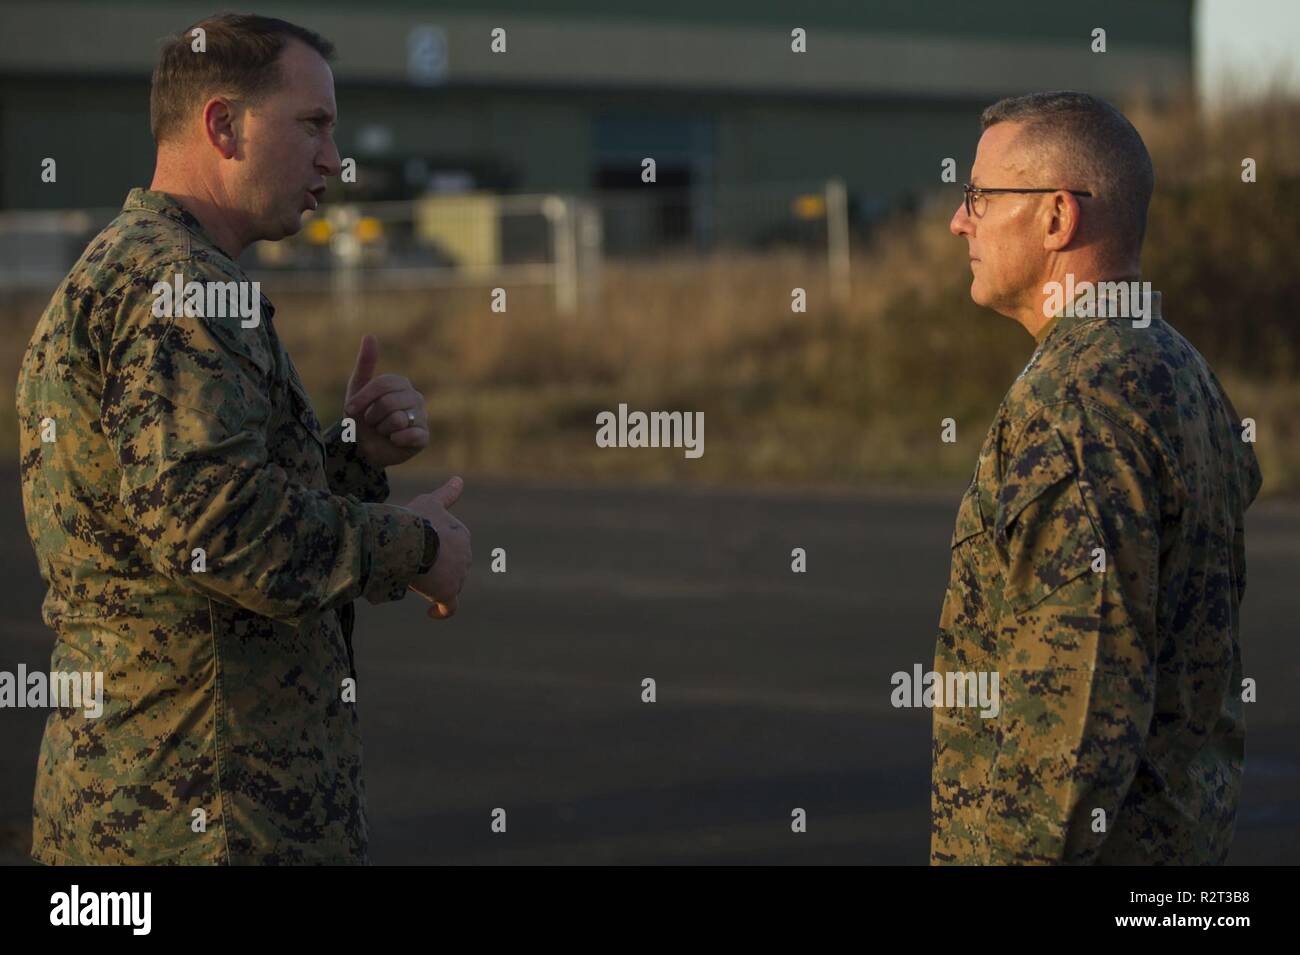 U.S. Marines Chief Warrant Officer 4 Clint Runyon, a visual information officer with Communication Strategy and Operations, II Marine Expeditionary Force (II MEF), speaks with Lt. Gen. Robert F. Hedelund, the commanding general of II MEF during Exercise Trident Juncture 18 at Vaernes Air Station, Norway, Nov. 7, 2018.  Trident Juncture 18 enhances the U.S. and NATO Allies’ and partners’ abilities to work together collectively to conduct military operations under challenging conditions. Stock Photo